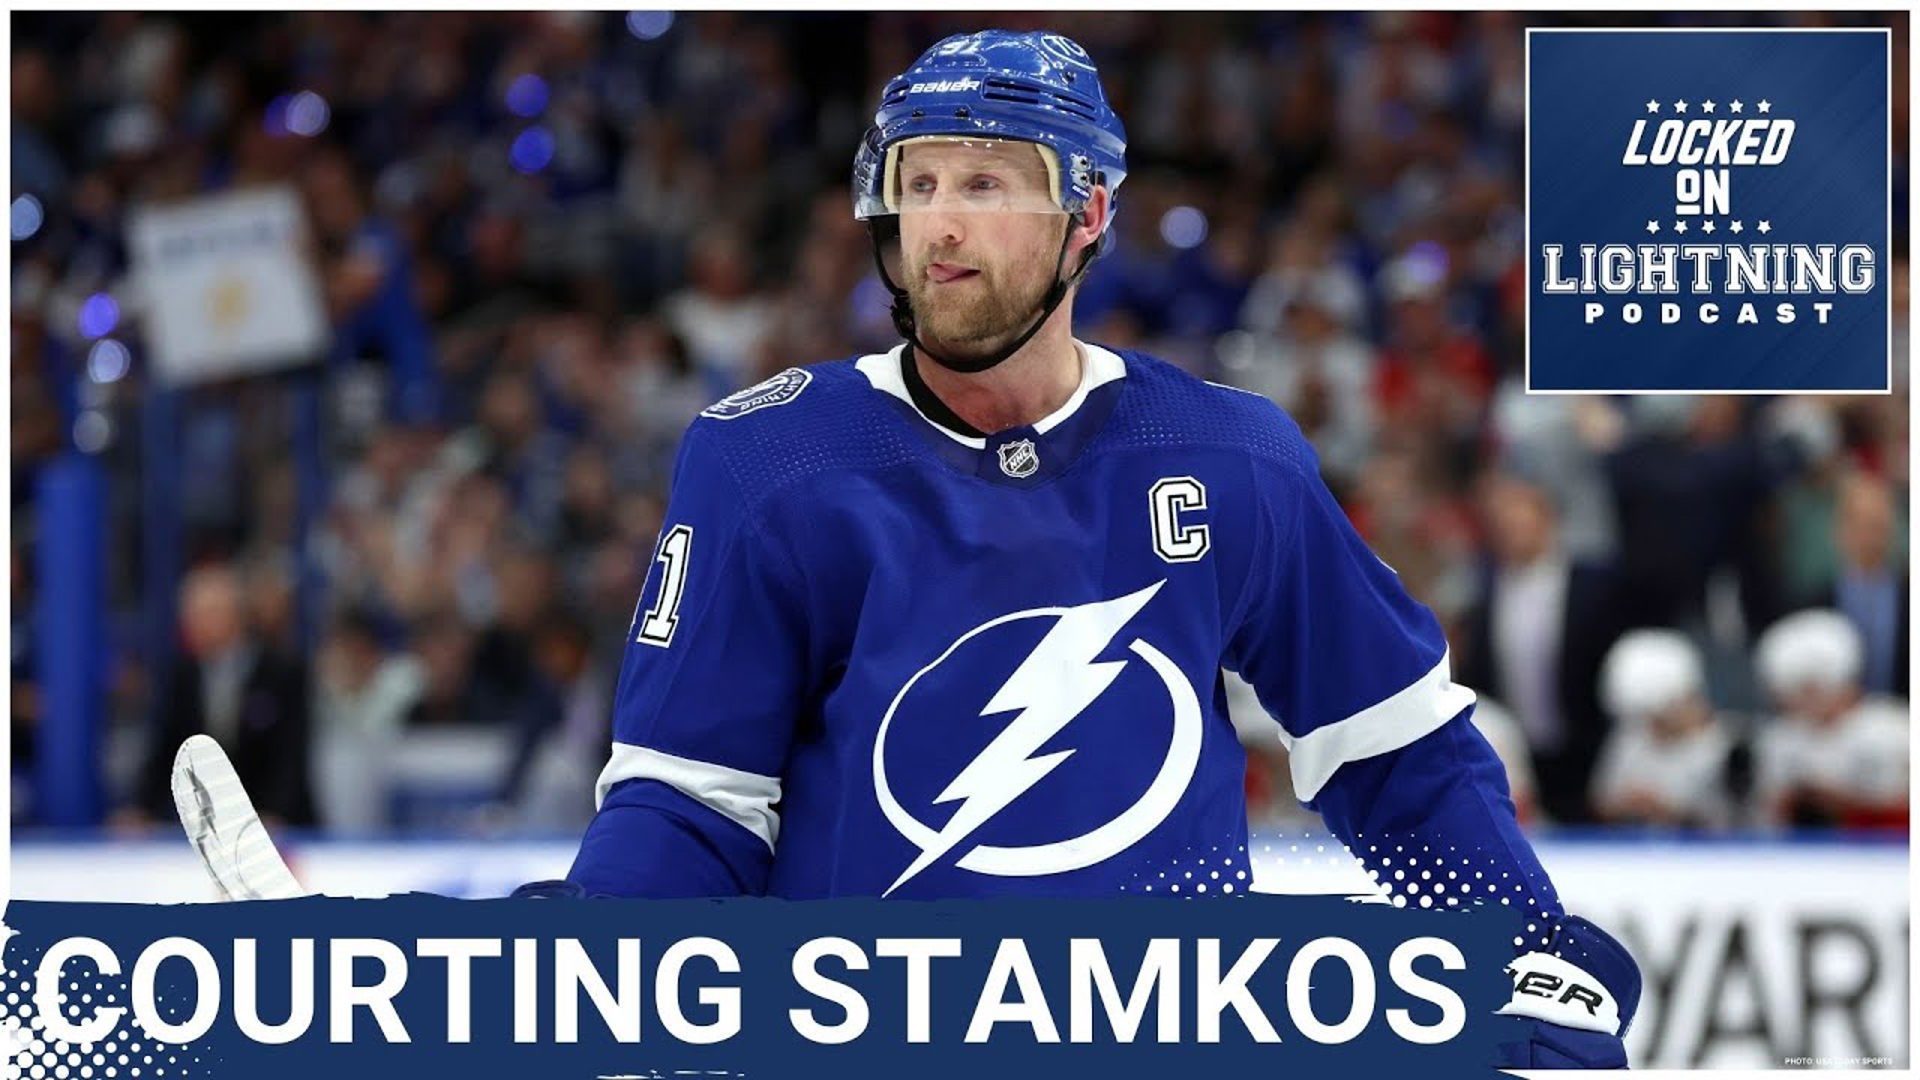 Where could Steven Stamkos end up outside of Tampa Bay? We discuss the odds for Stamkos destinations provided to us by Fanduel Sportsbook.